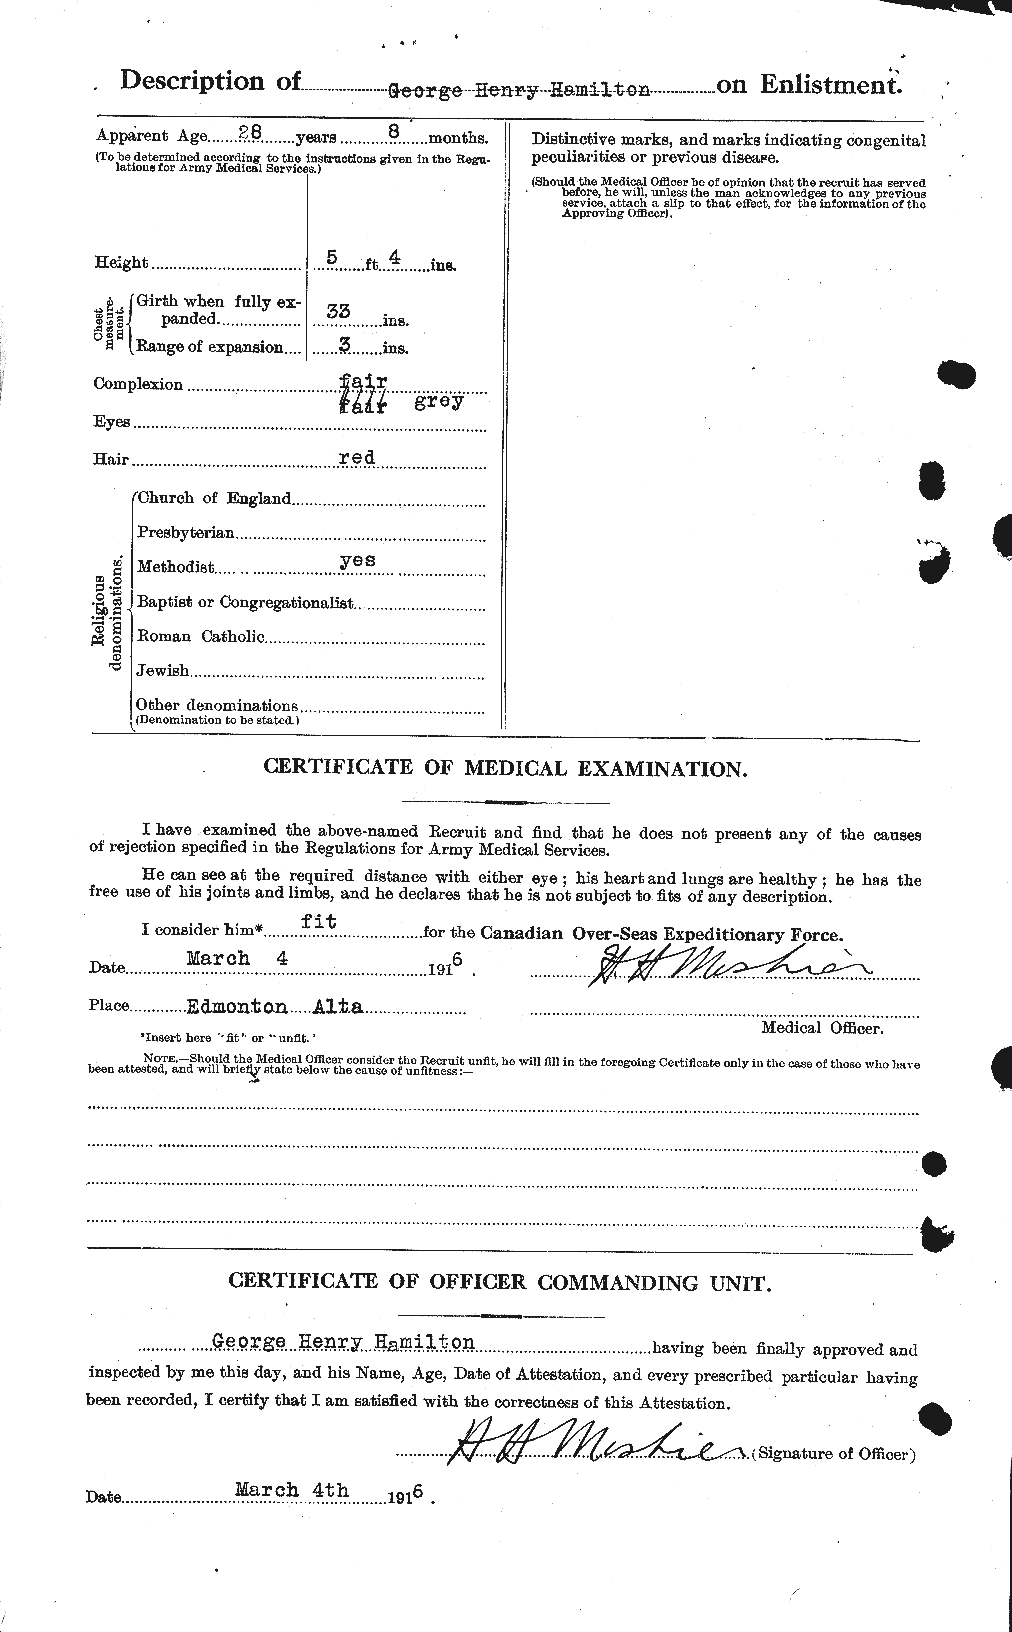 Personnel Records of the First World War - CEF 372463b